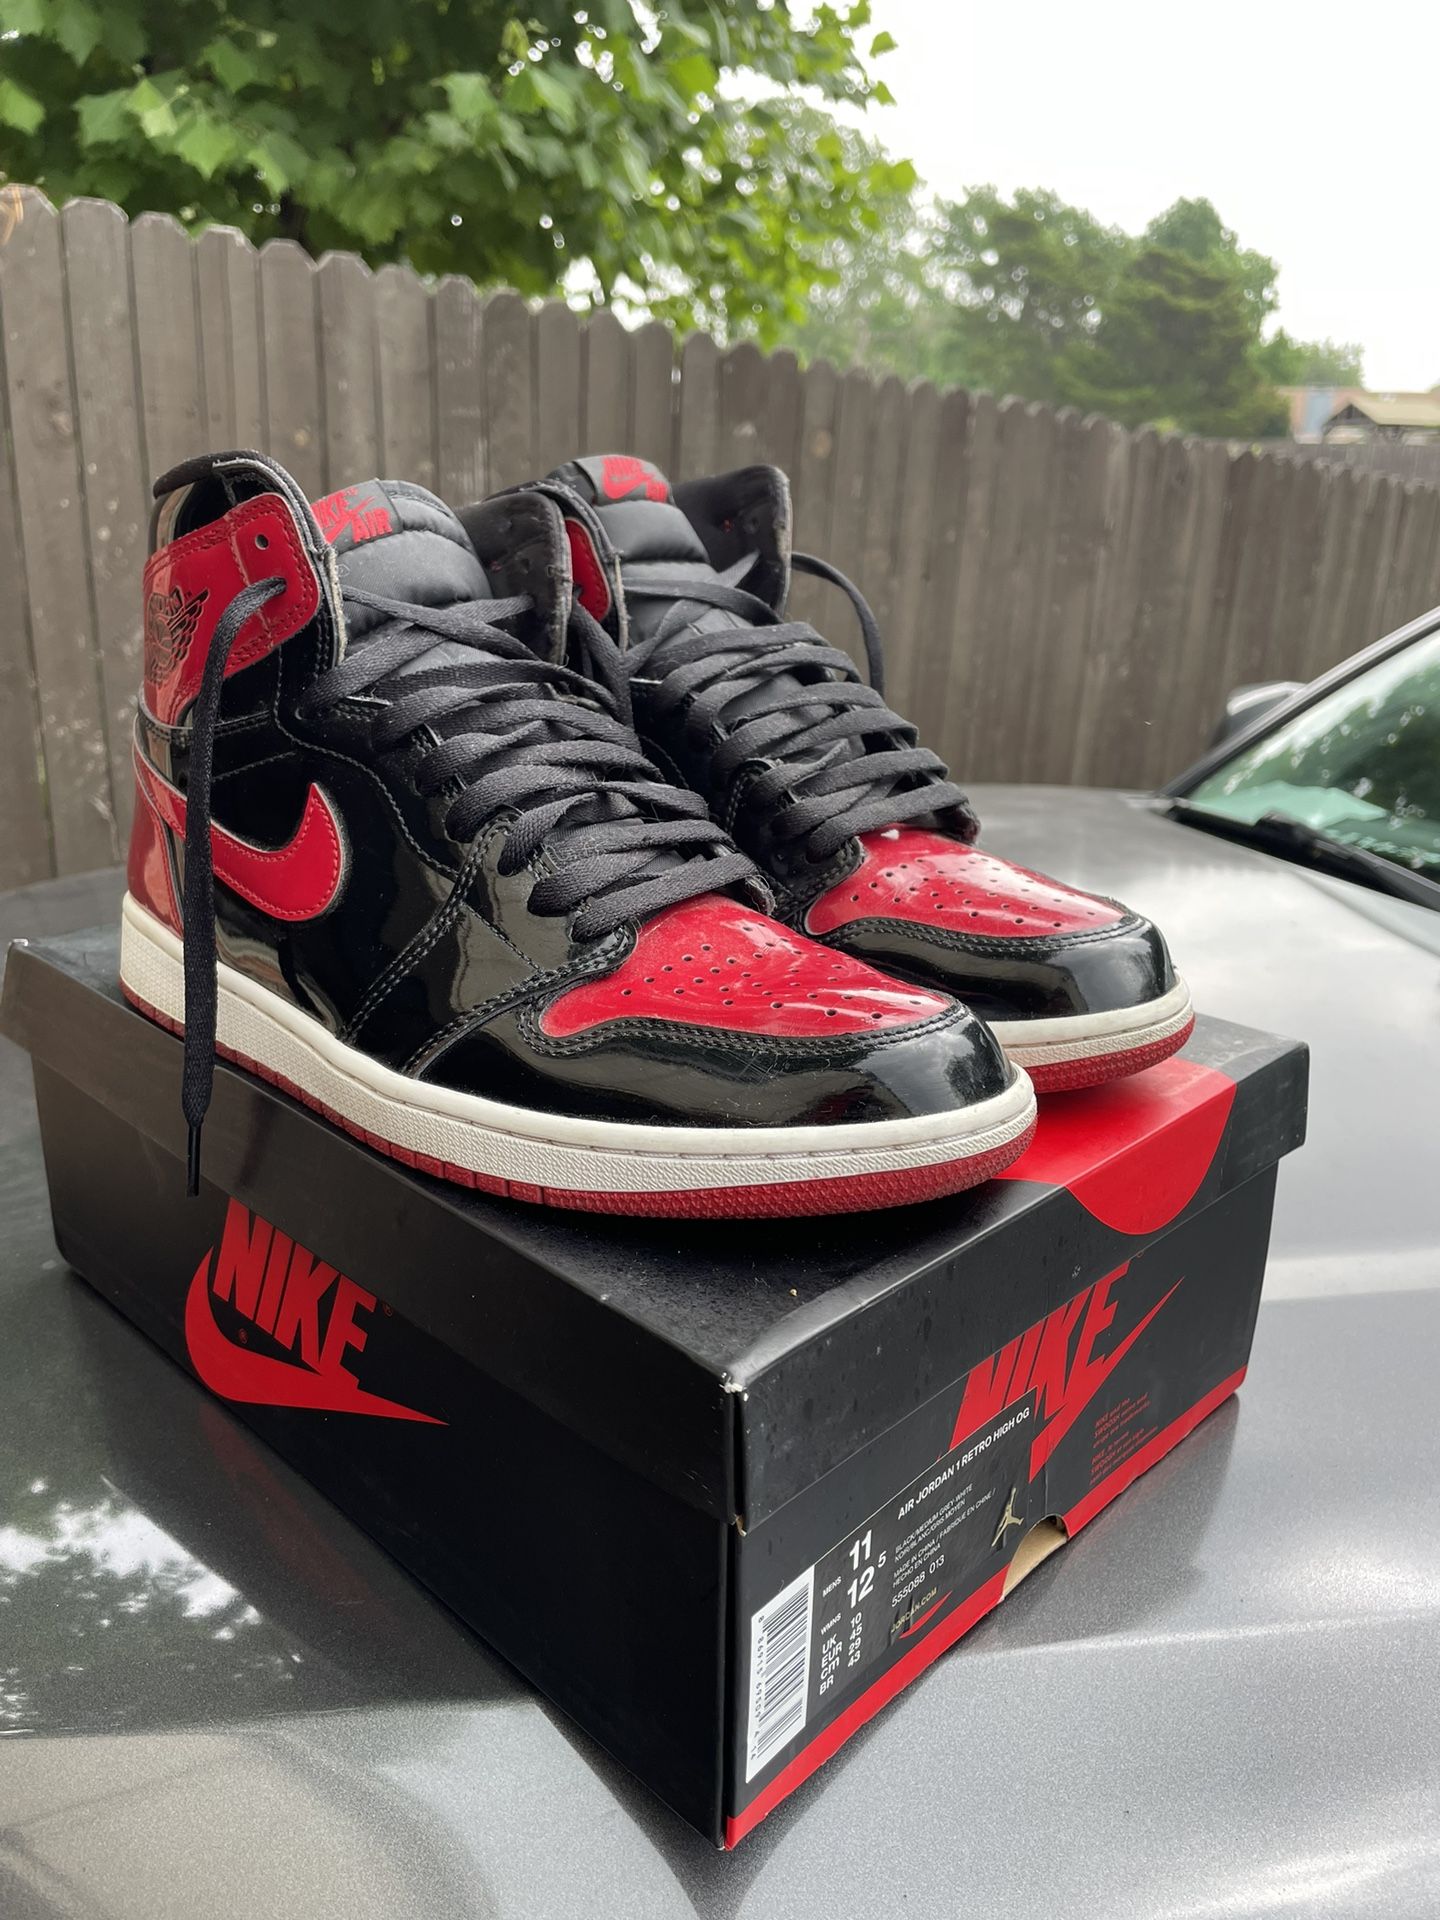 Patent Leather 1s 